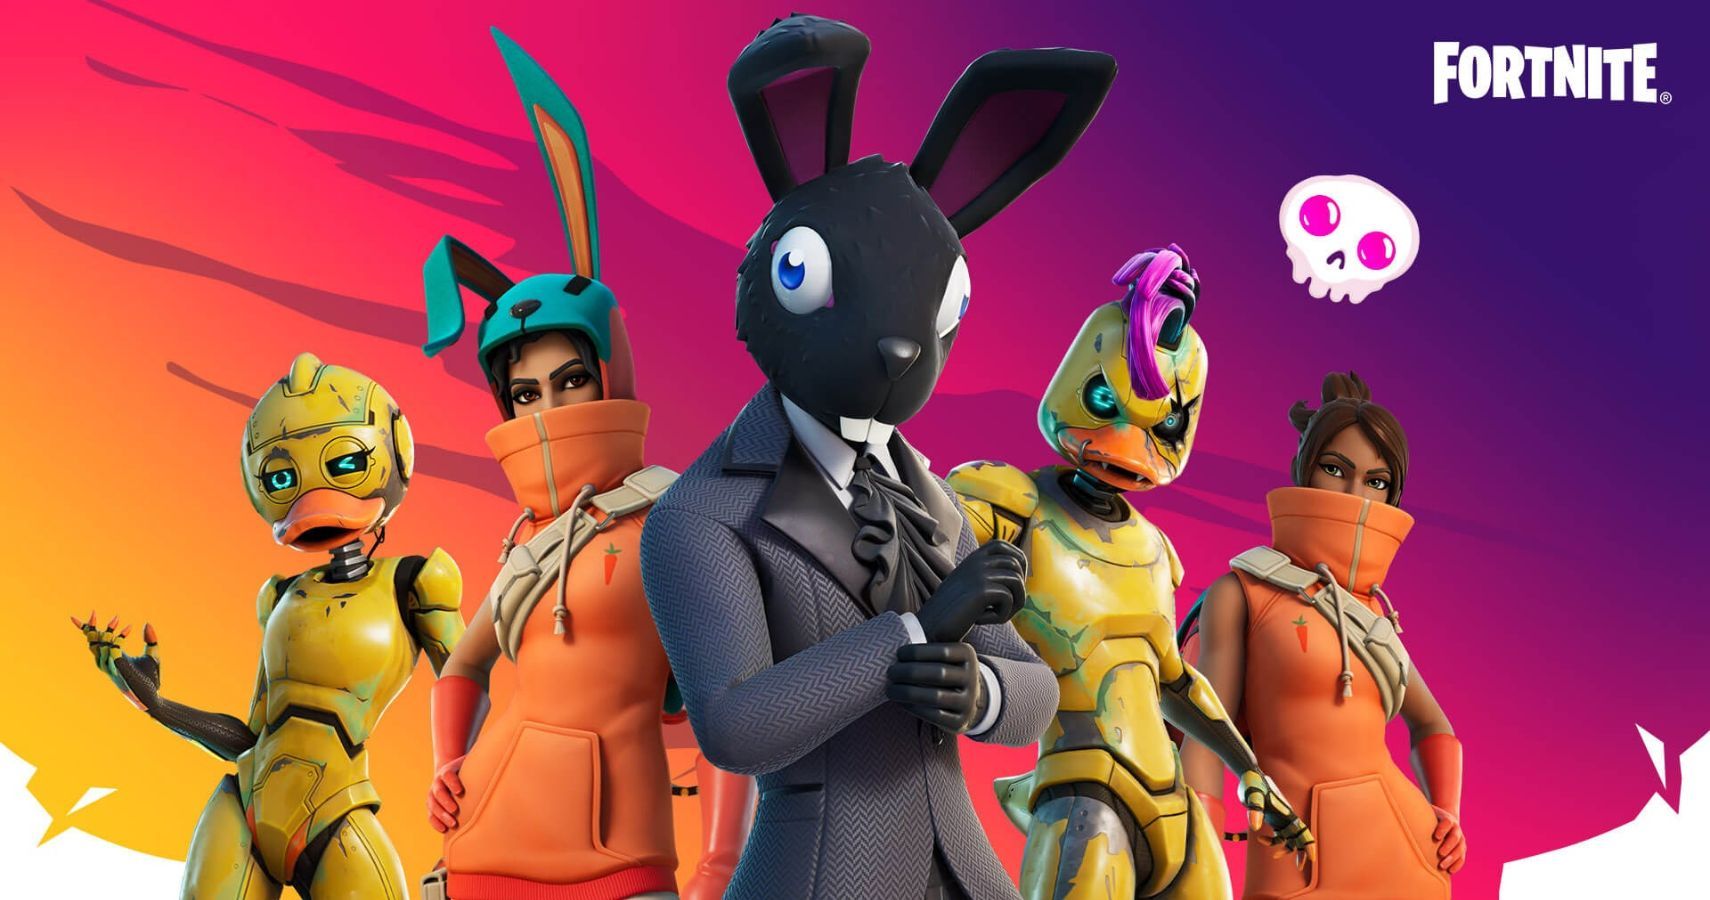 Fortnite Spring Breakout Details Easter Skins, Duos Cup, And More